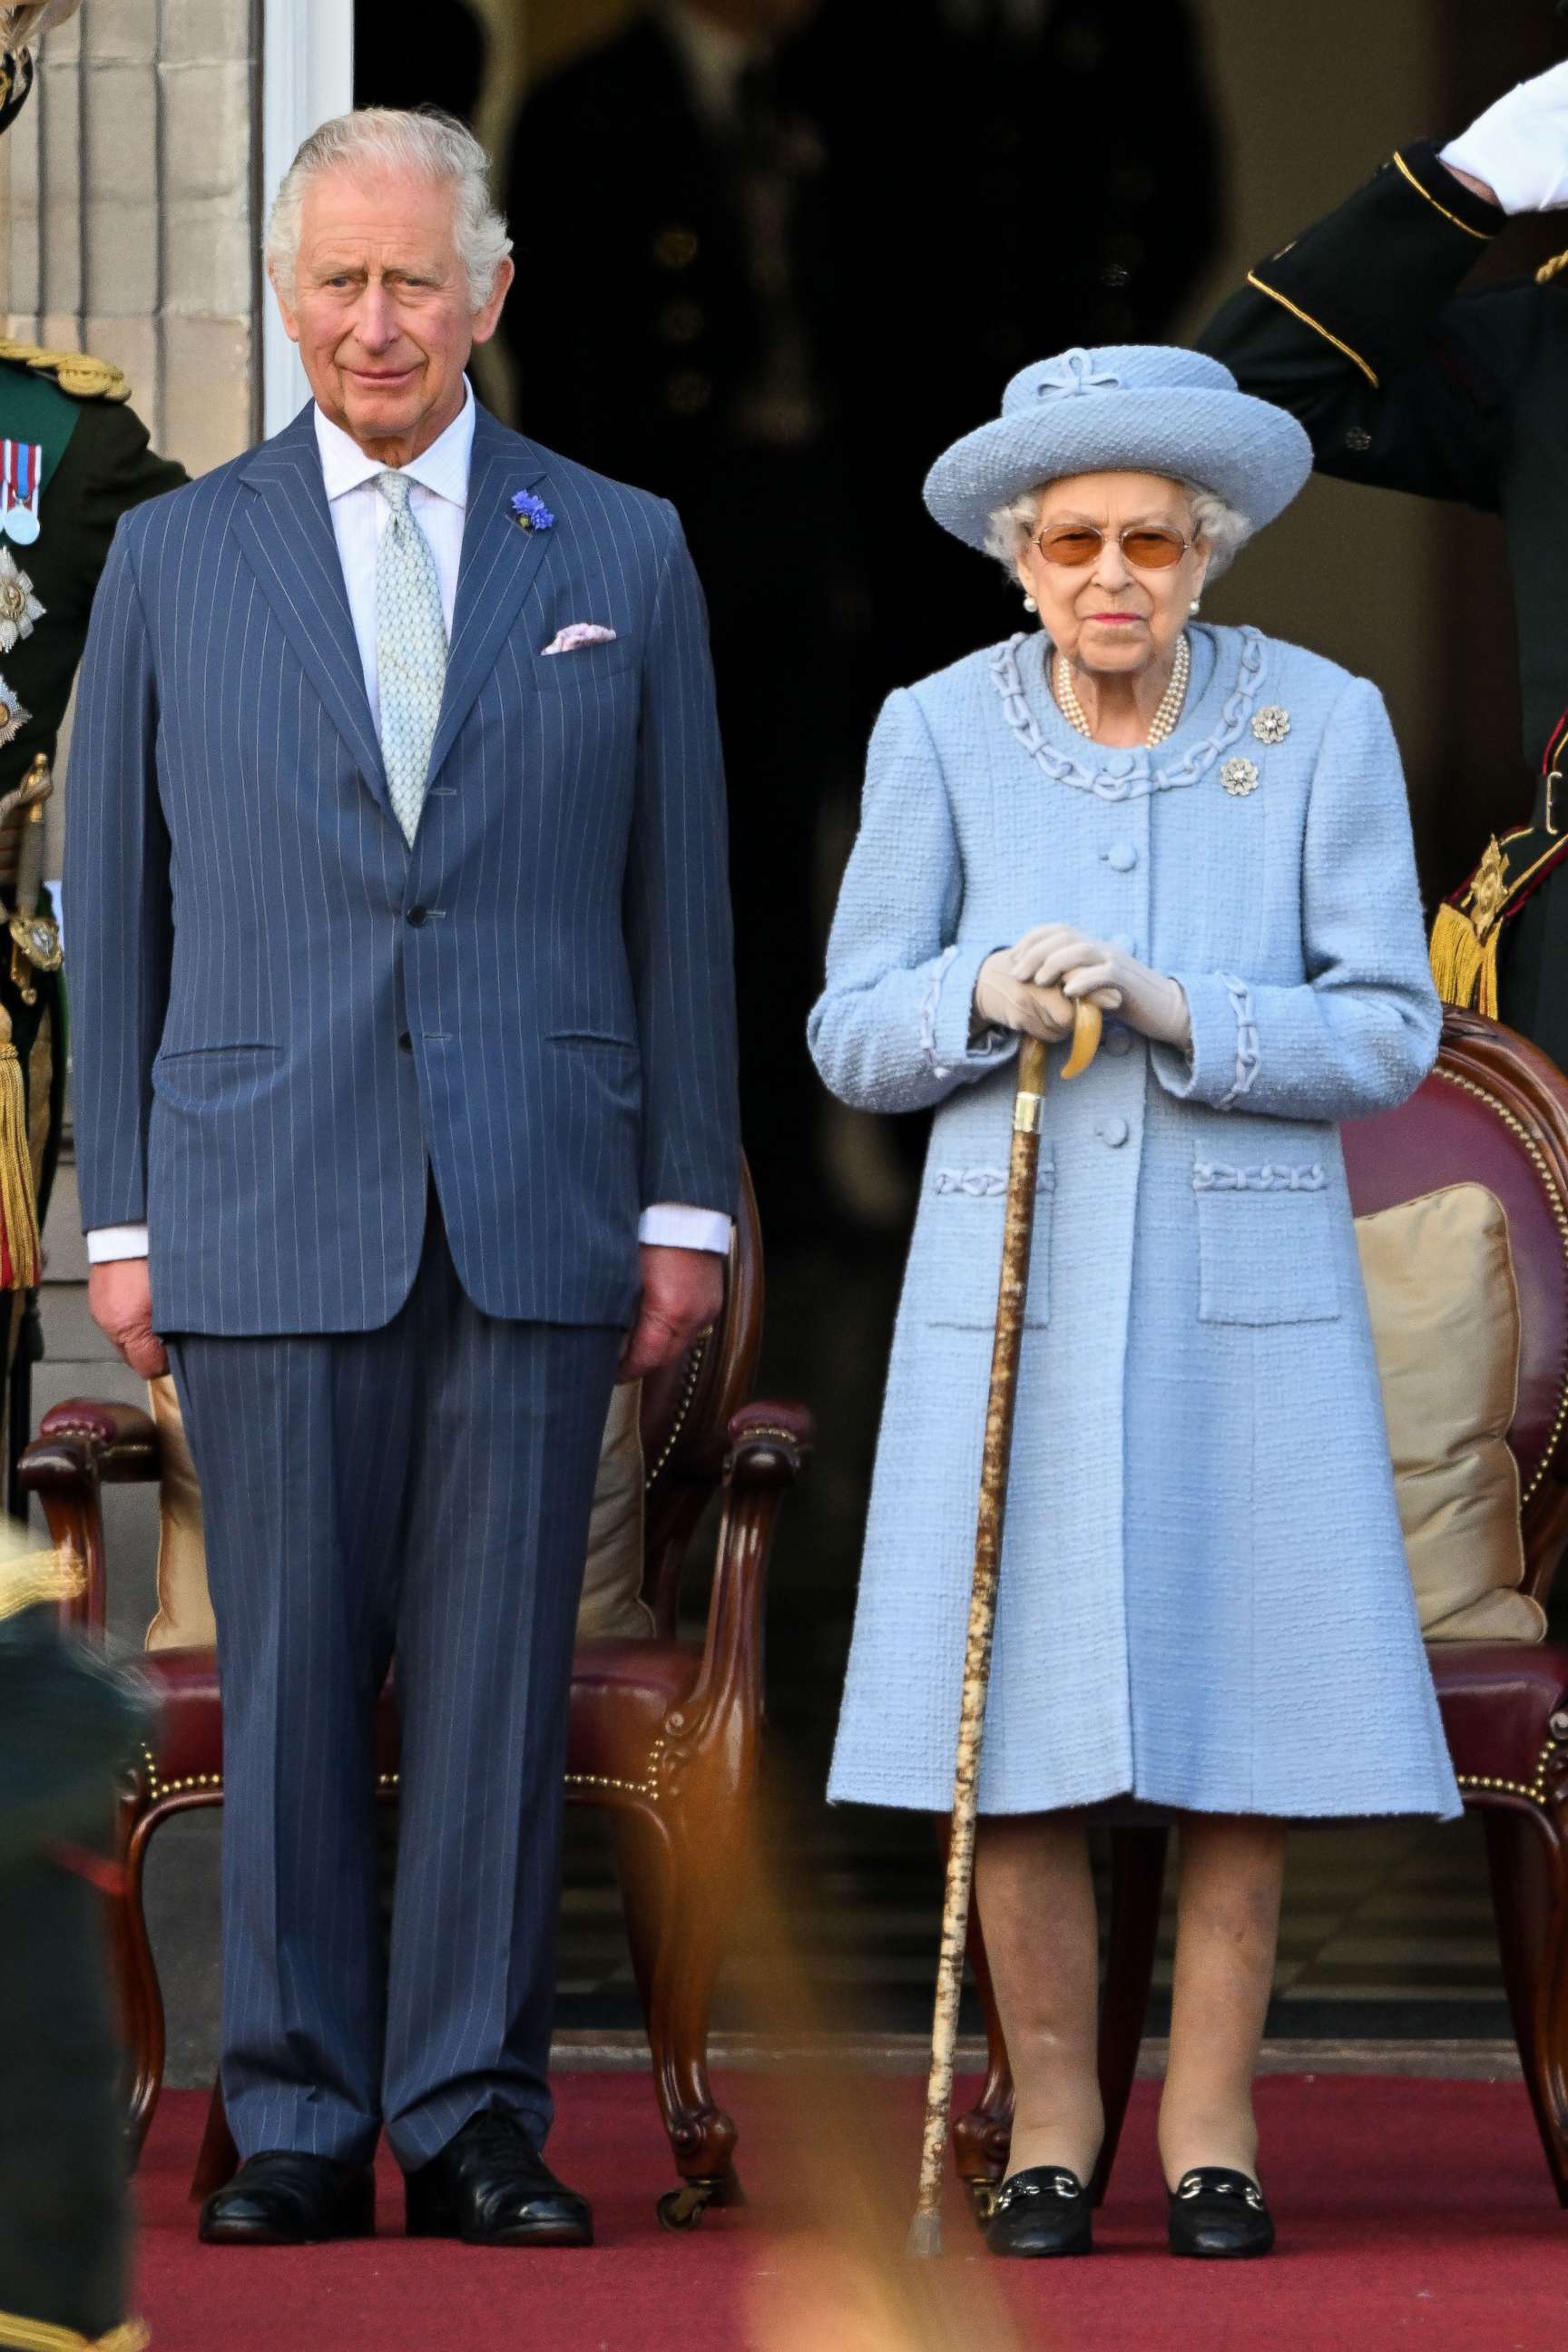 PHOTO: Prince Charles, Prince of Wales and Queen Elizabeth II attend the Royal Company of Archers Reddendo Parade in the gardens of the Palace of Holyroodhouse, Edinburgh U.K., June 30, 2022.